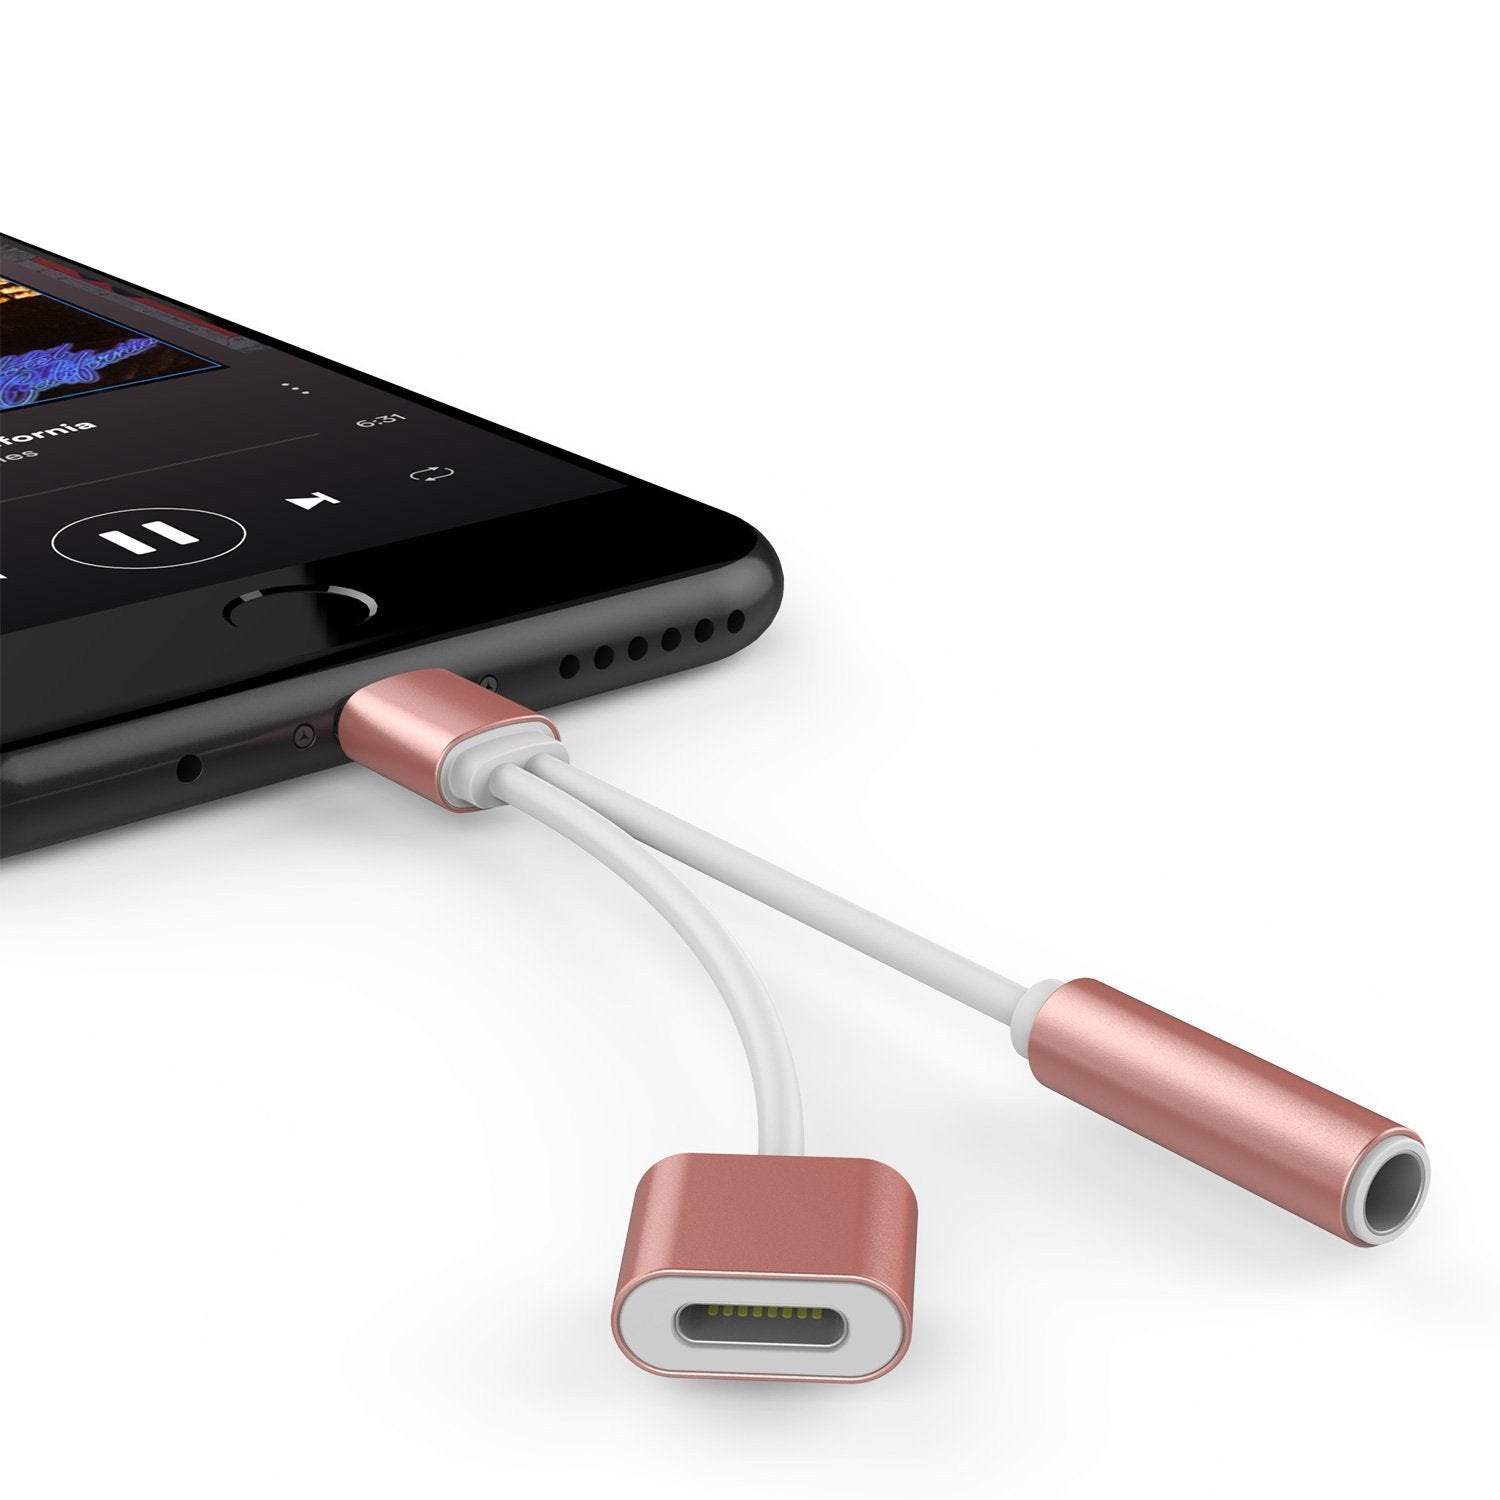 PUNKZAP Lightning Adapter Cable 2 in 1 Splitter Charger [ROSE]